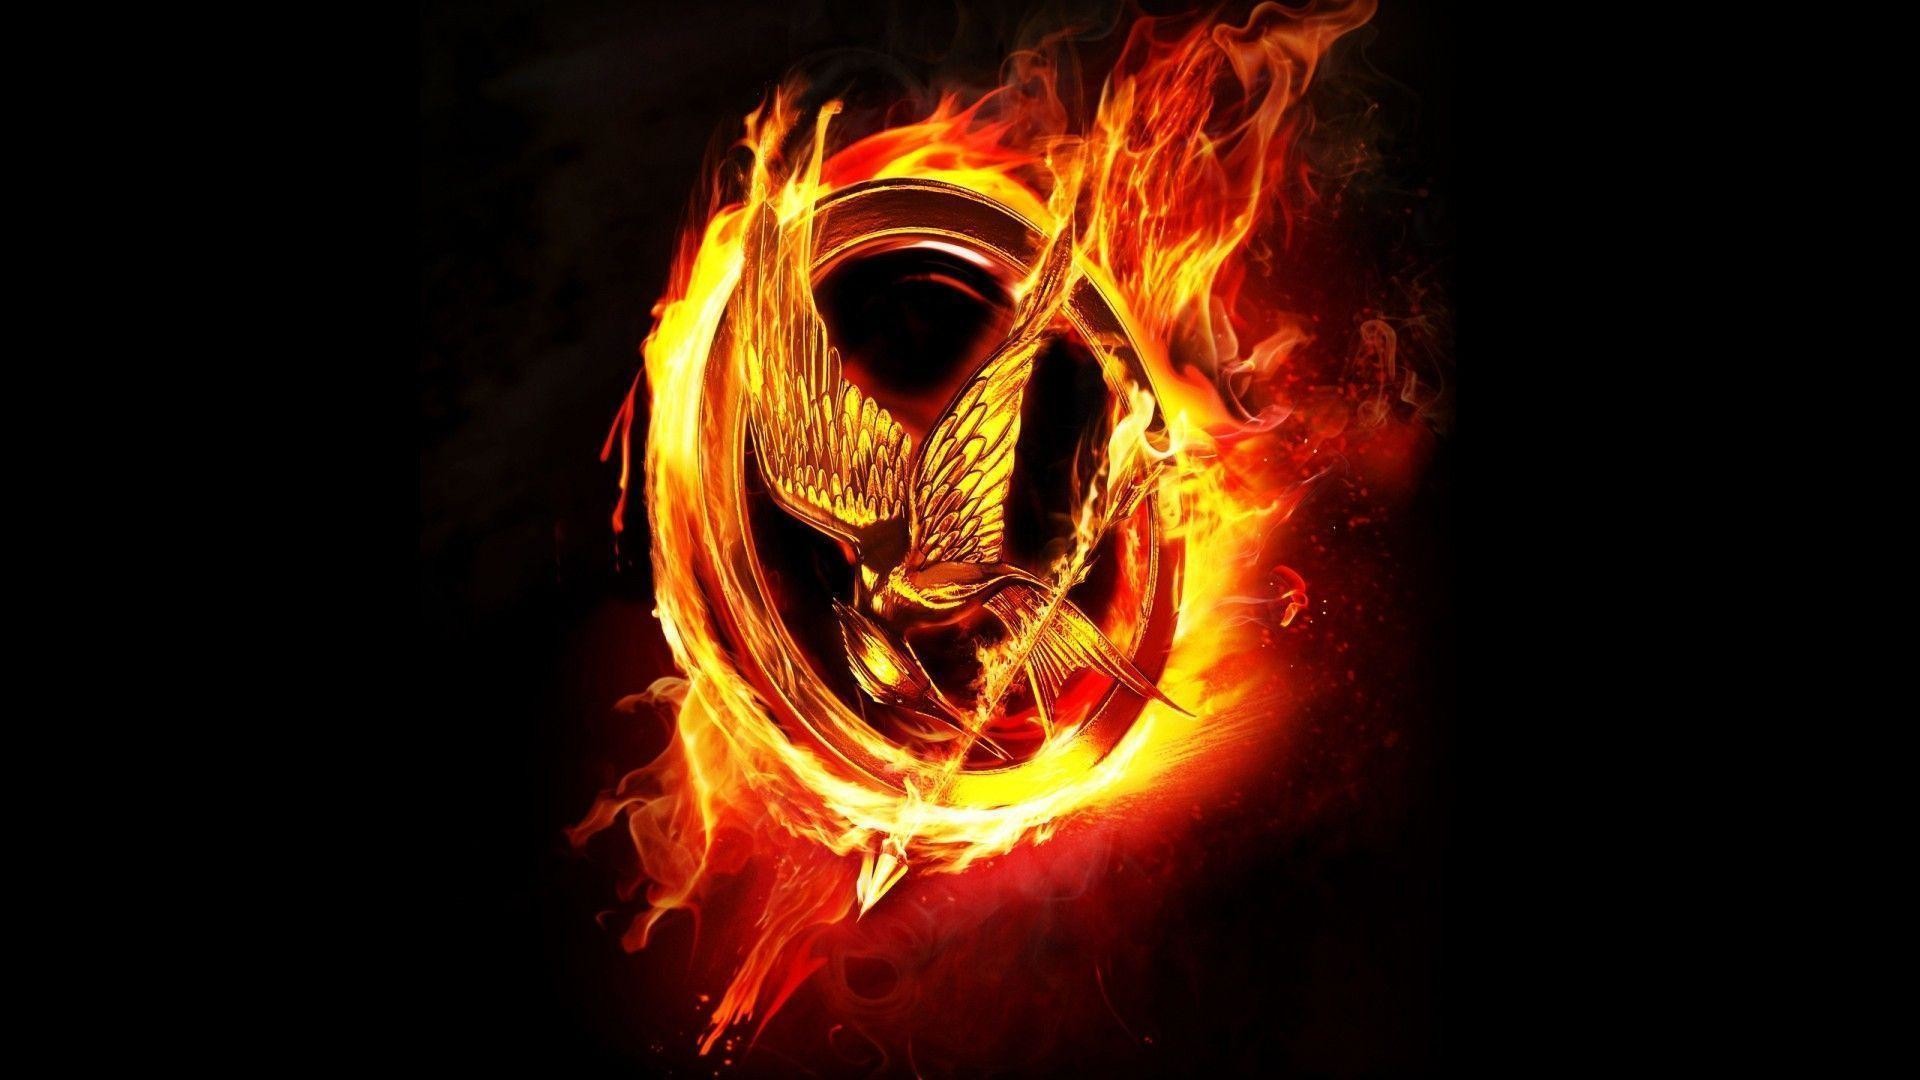 1920x1080 catching fire wallpapers | Awesome Wallpapers